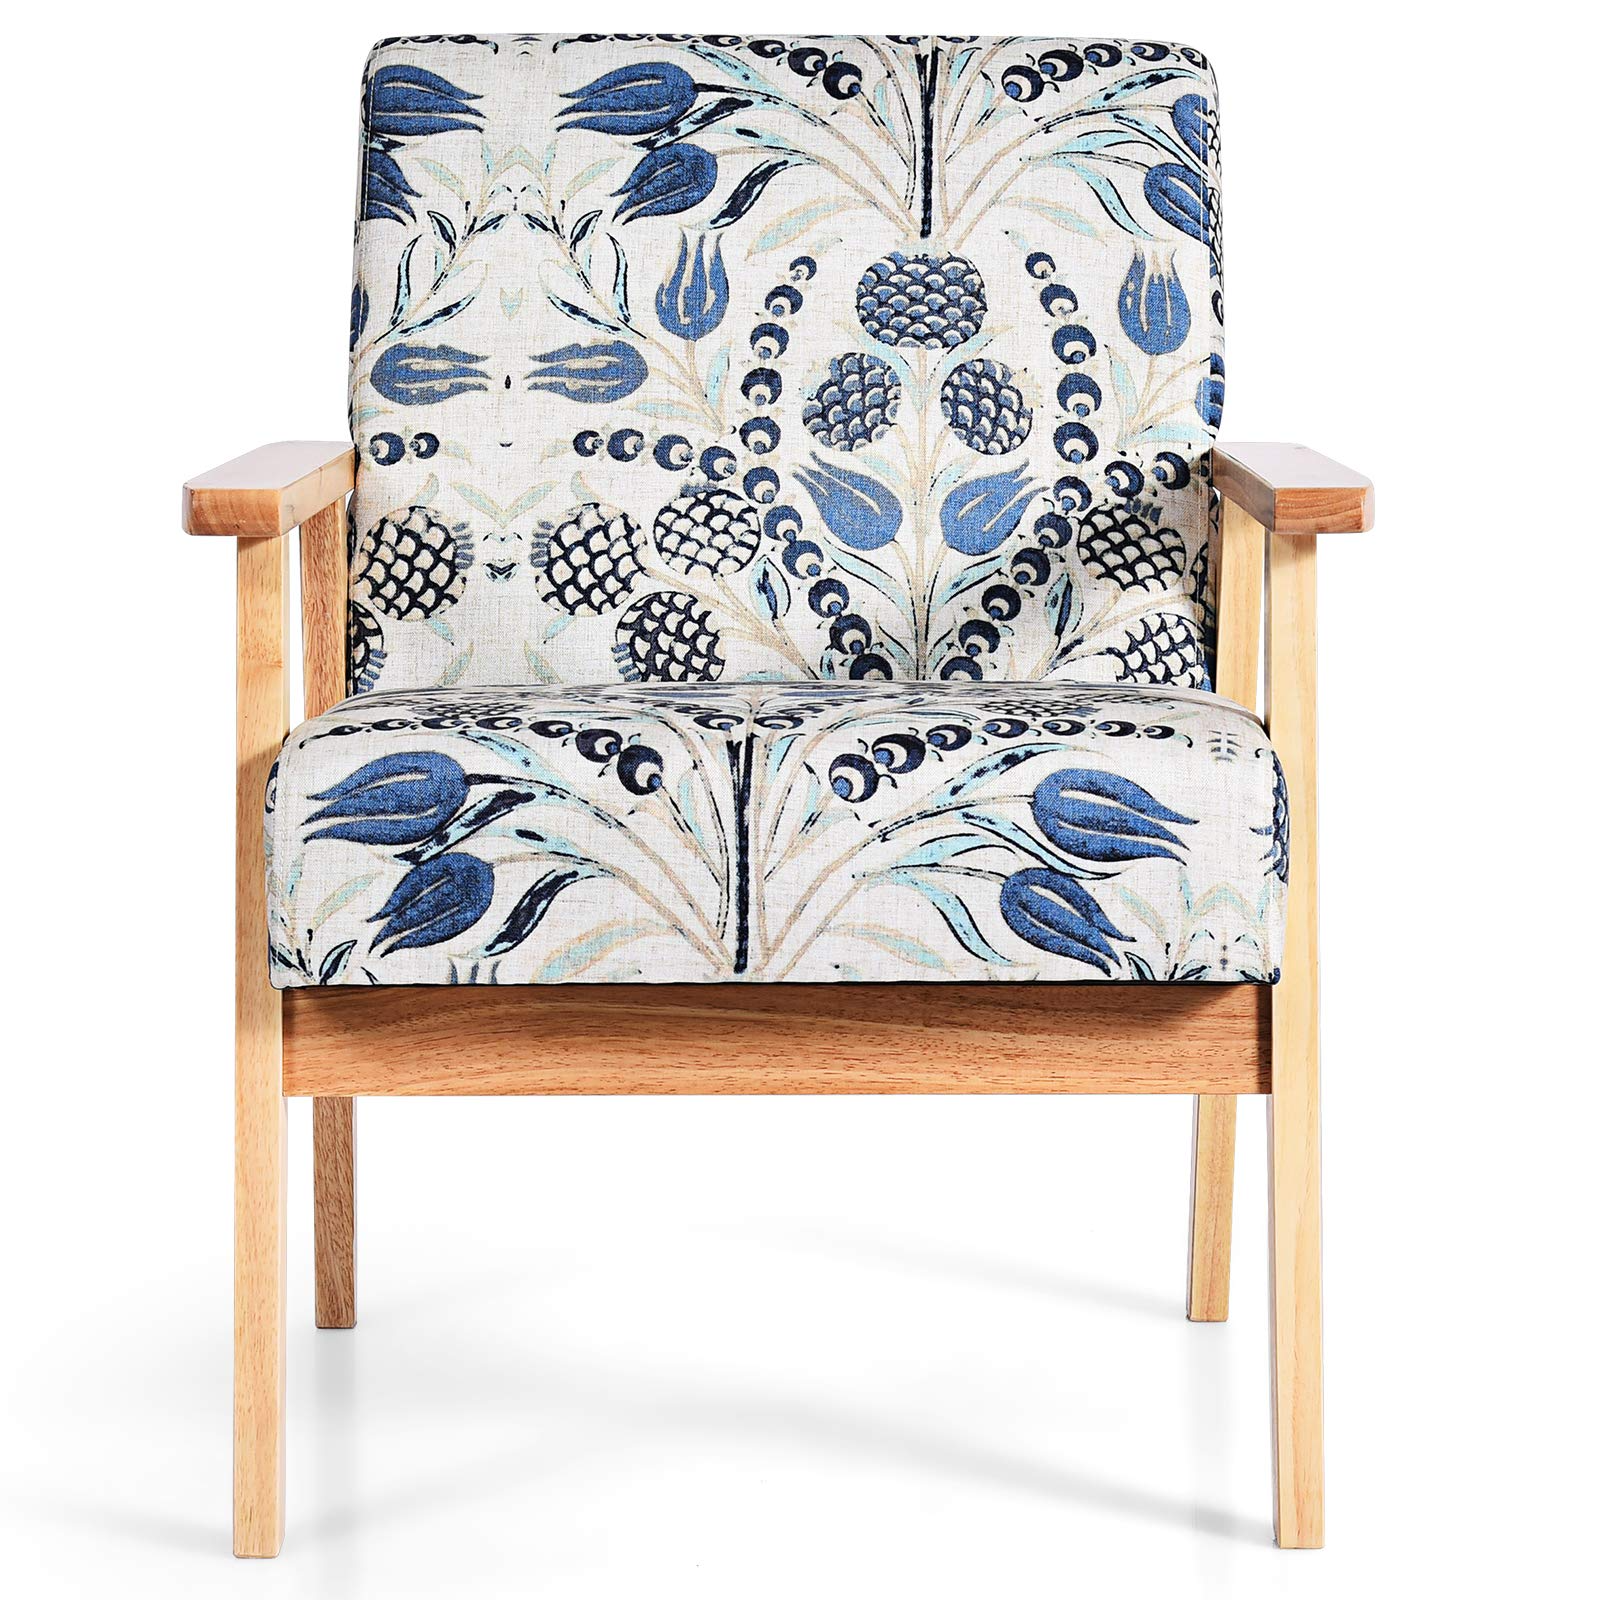 Giantex Decorative Retro Accent Chairs for Living Room